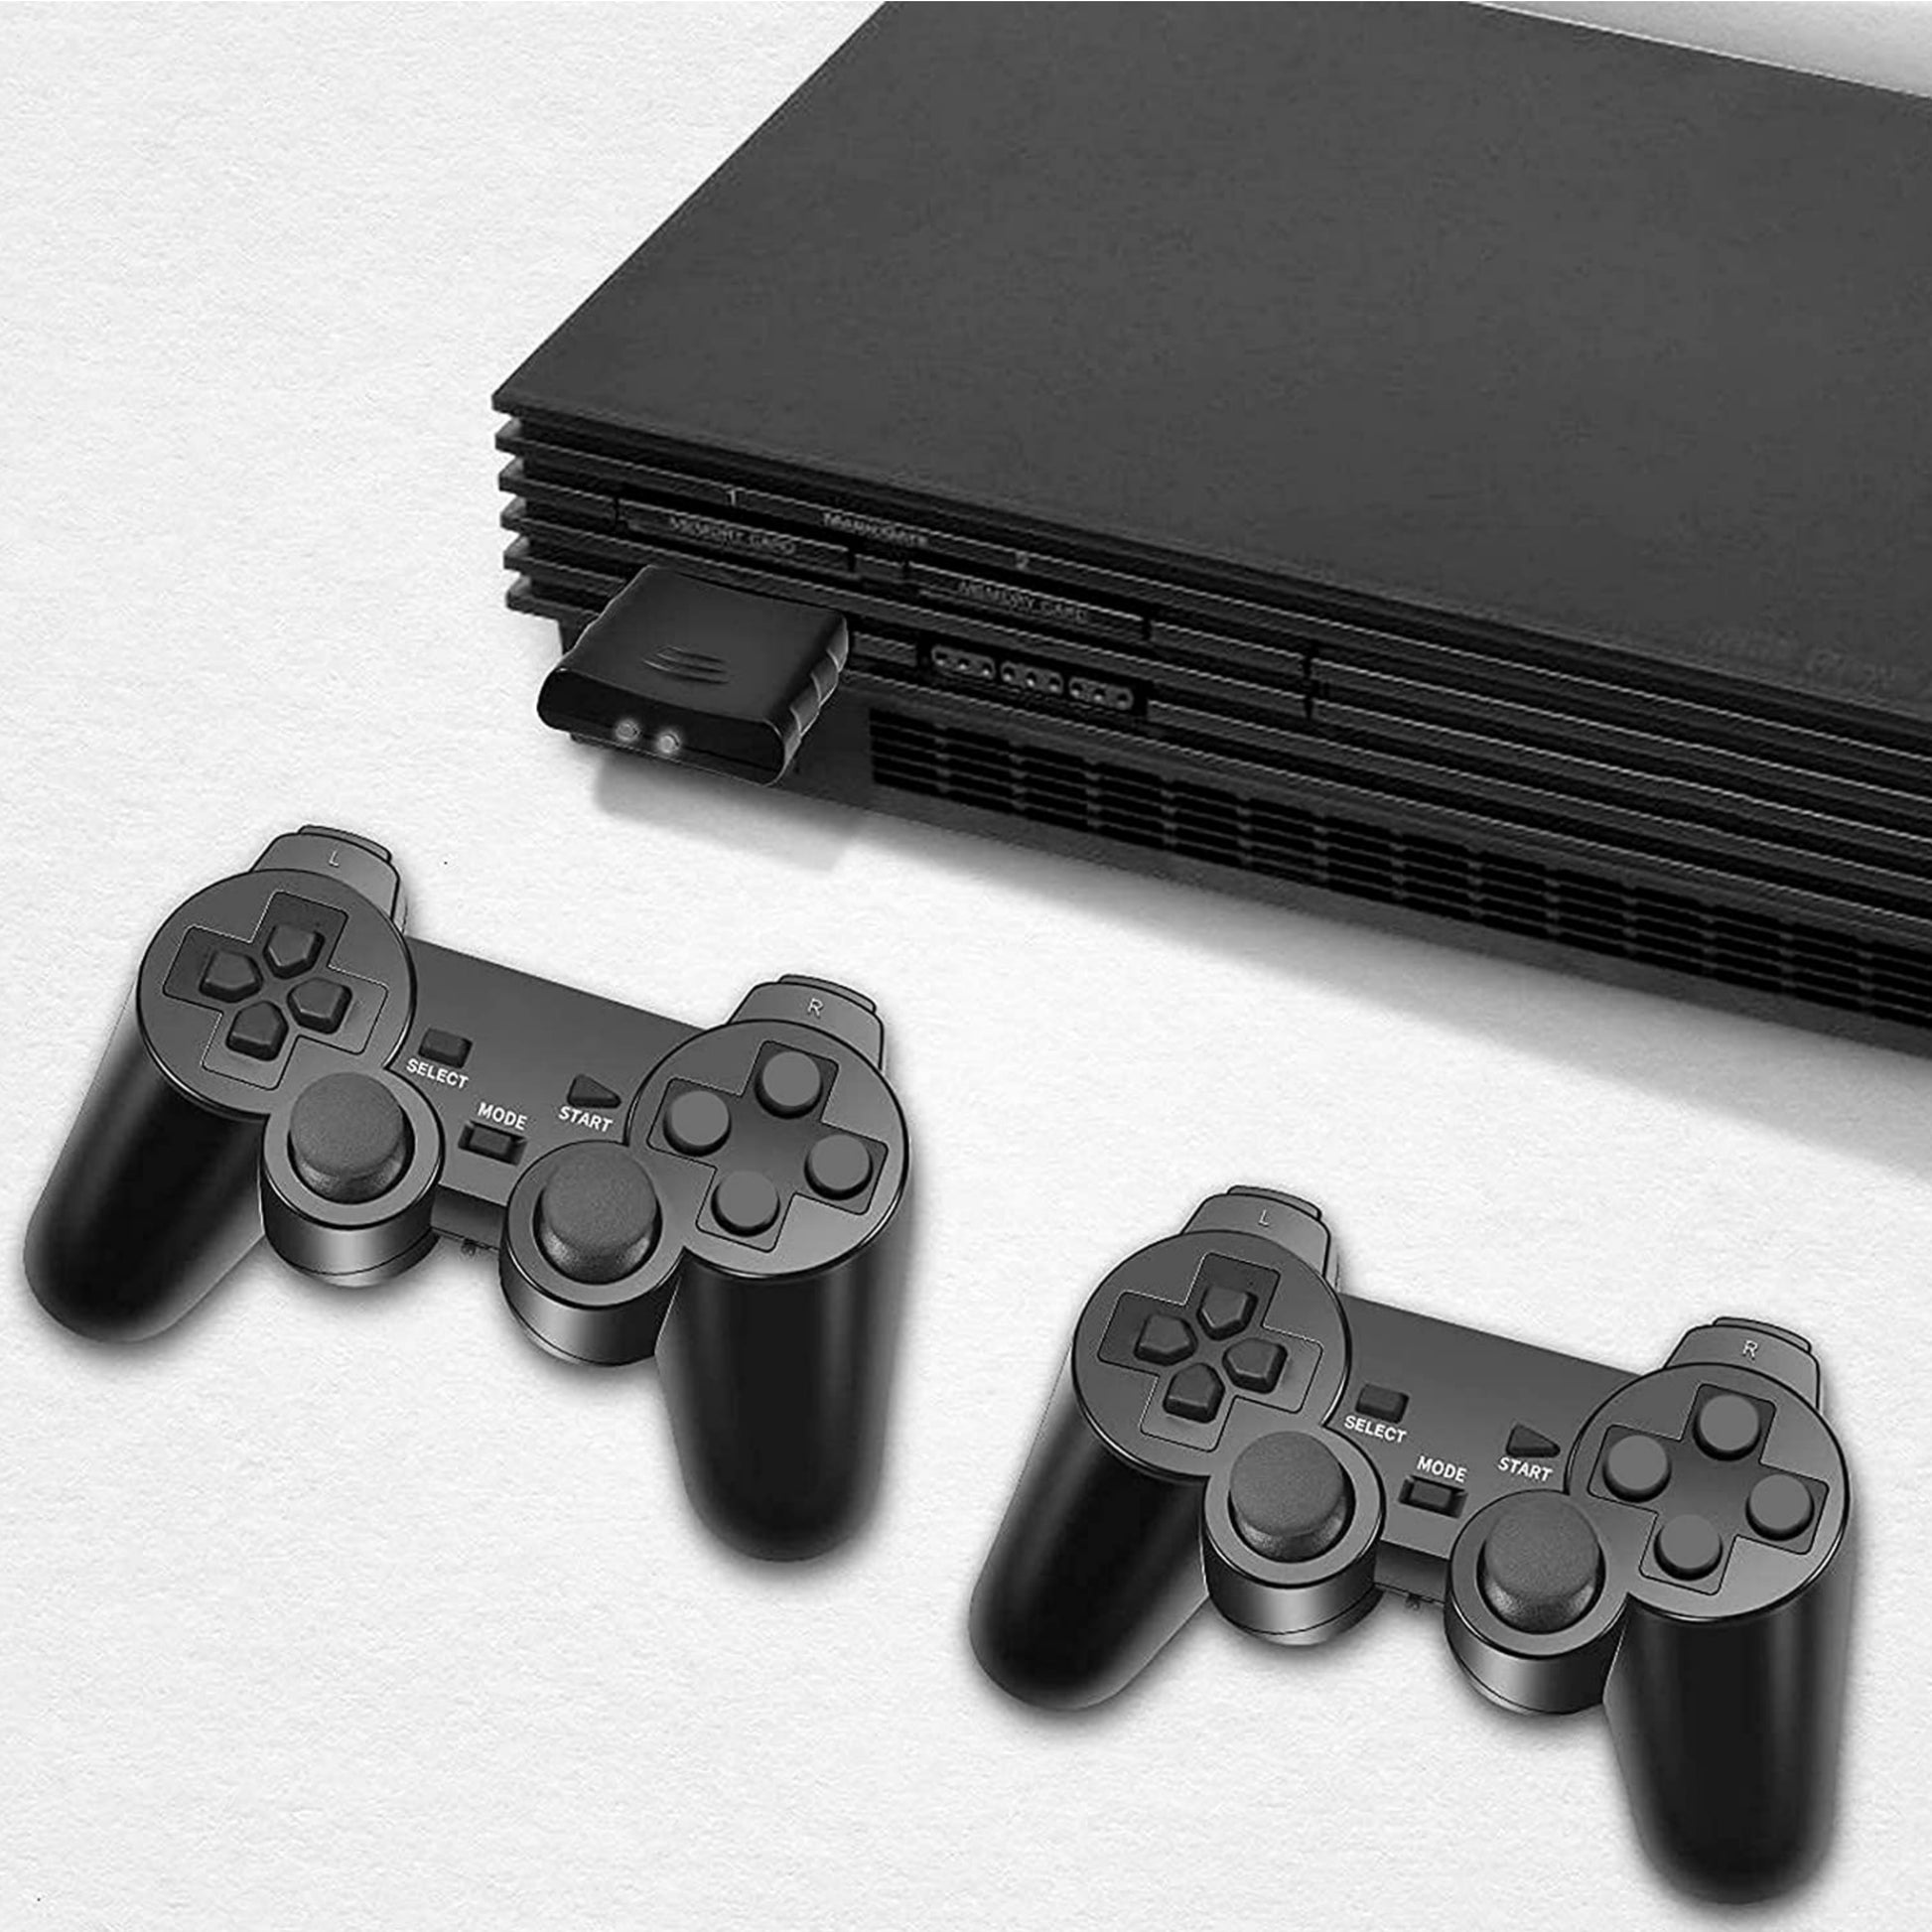 PS2 Console from 2P Gaming